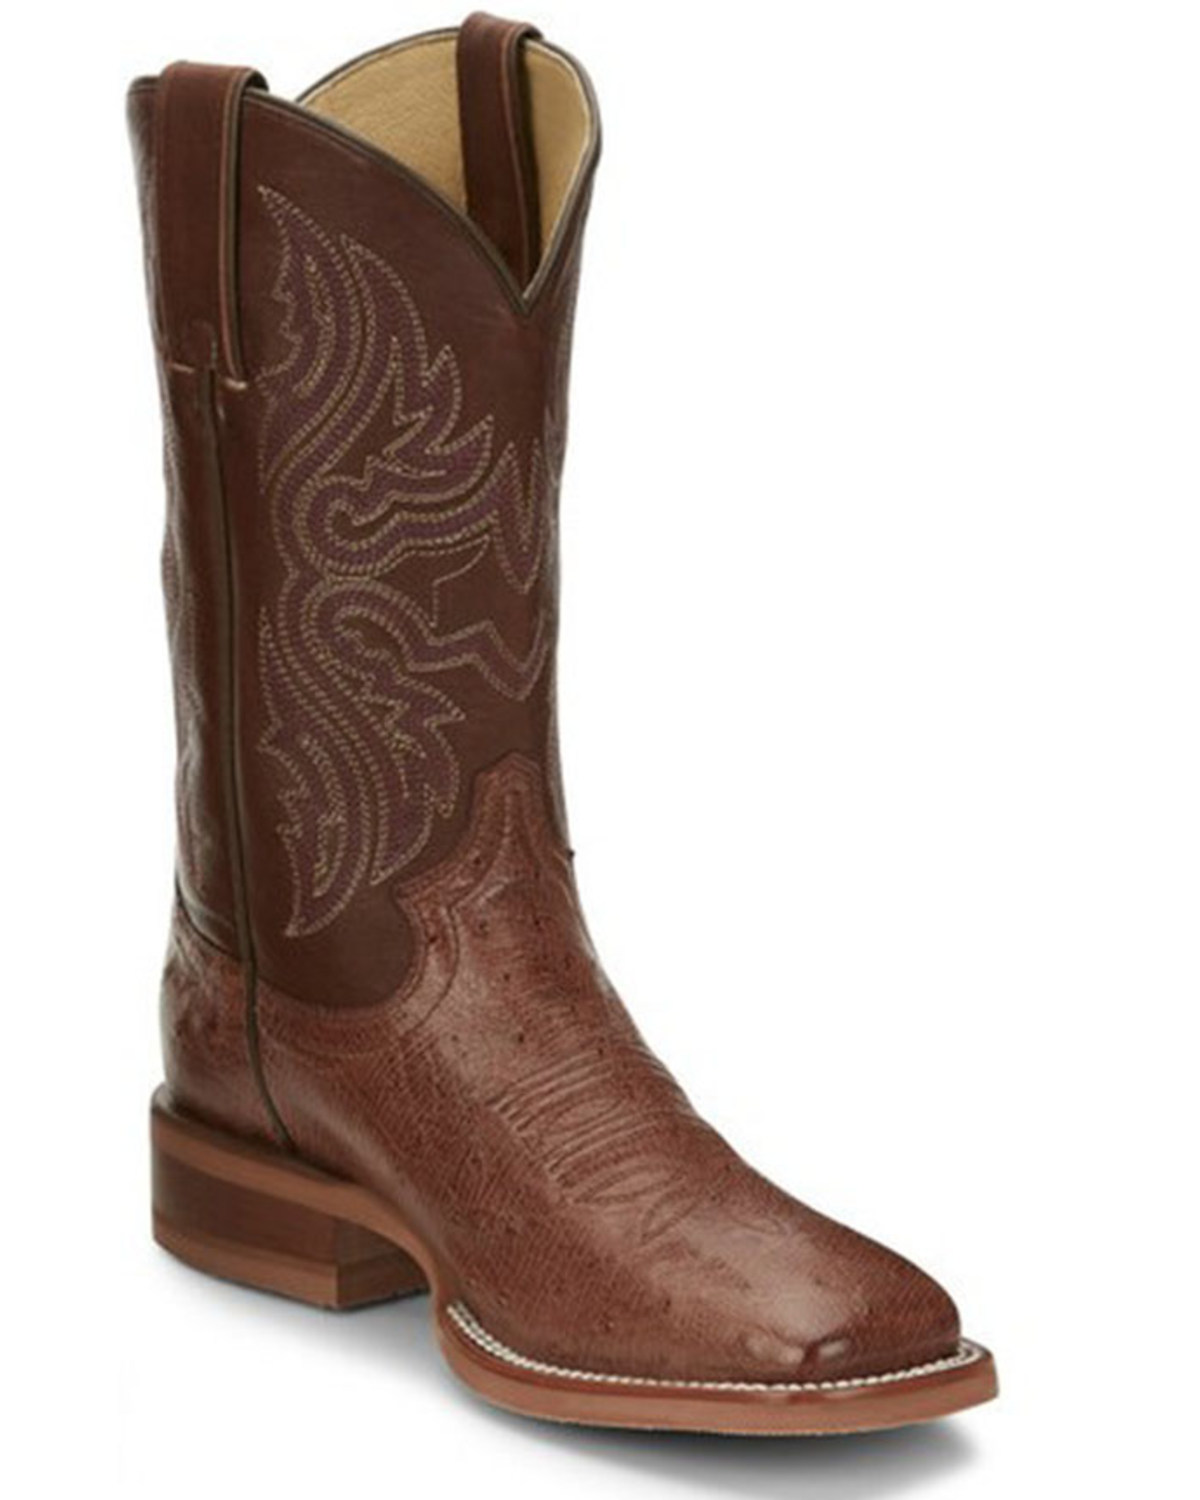 Justin Boots Women's Smooth Ostrich Western - Broad Square Toe